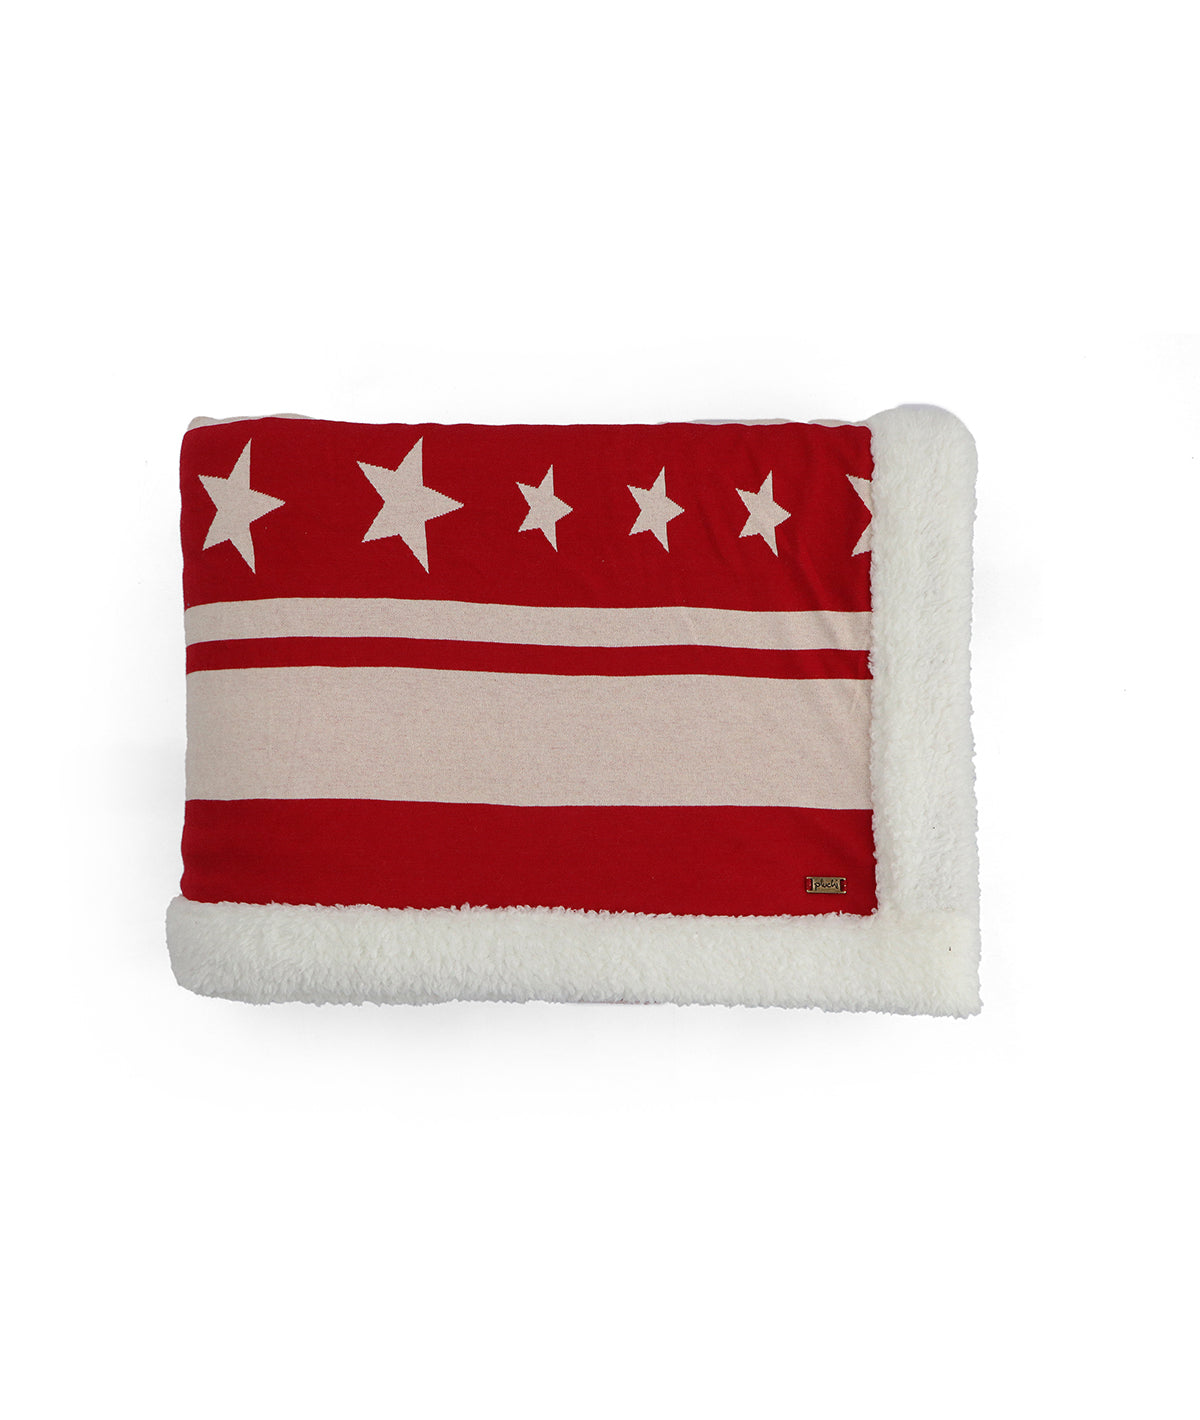 Stripe Star Red & Natural Cotton Knitted Single Bed Blanket layered with Warm Sherpa Fabric